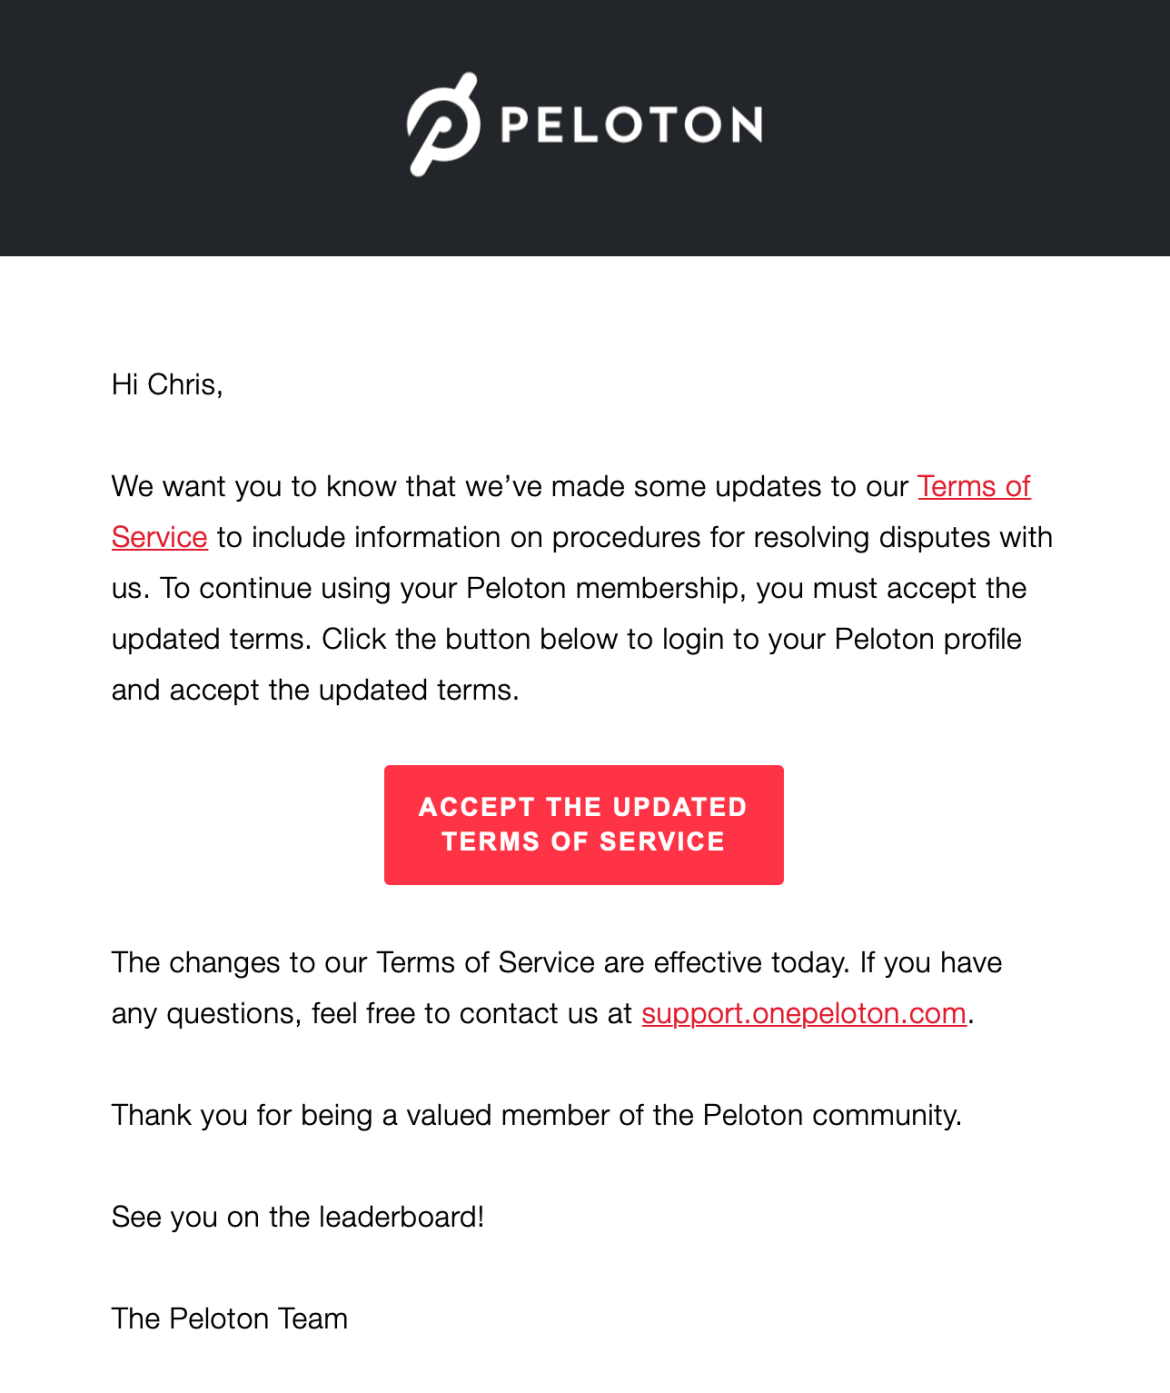 Peloton email informing members of updated terms of service.